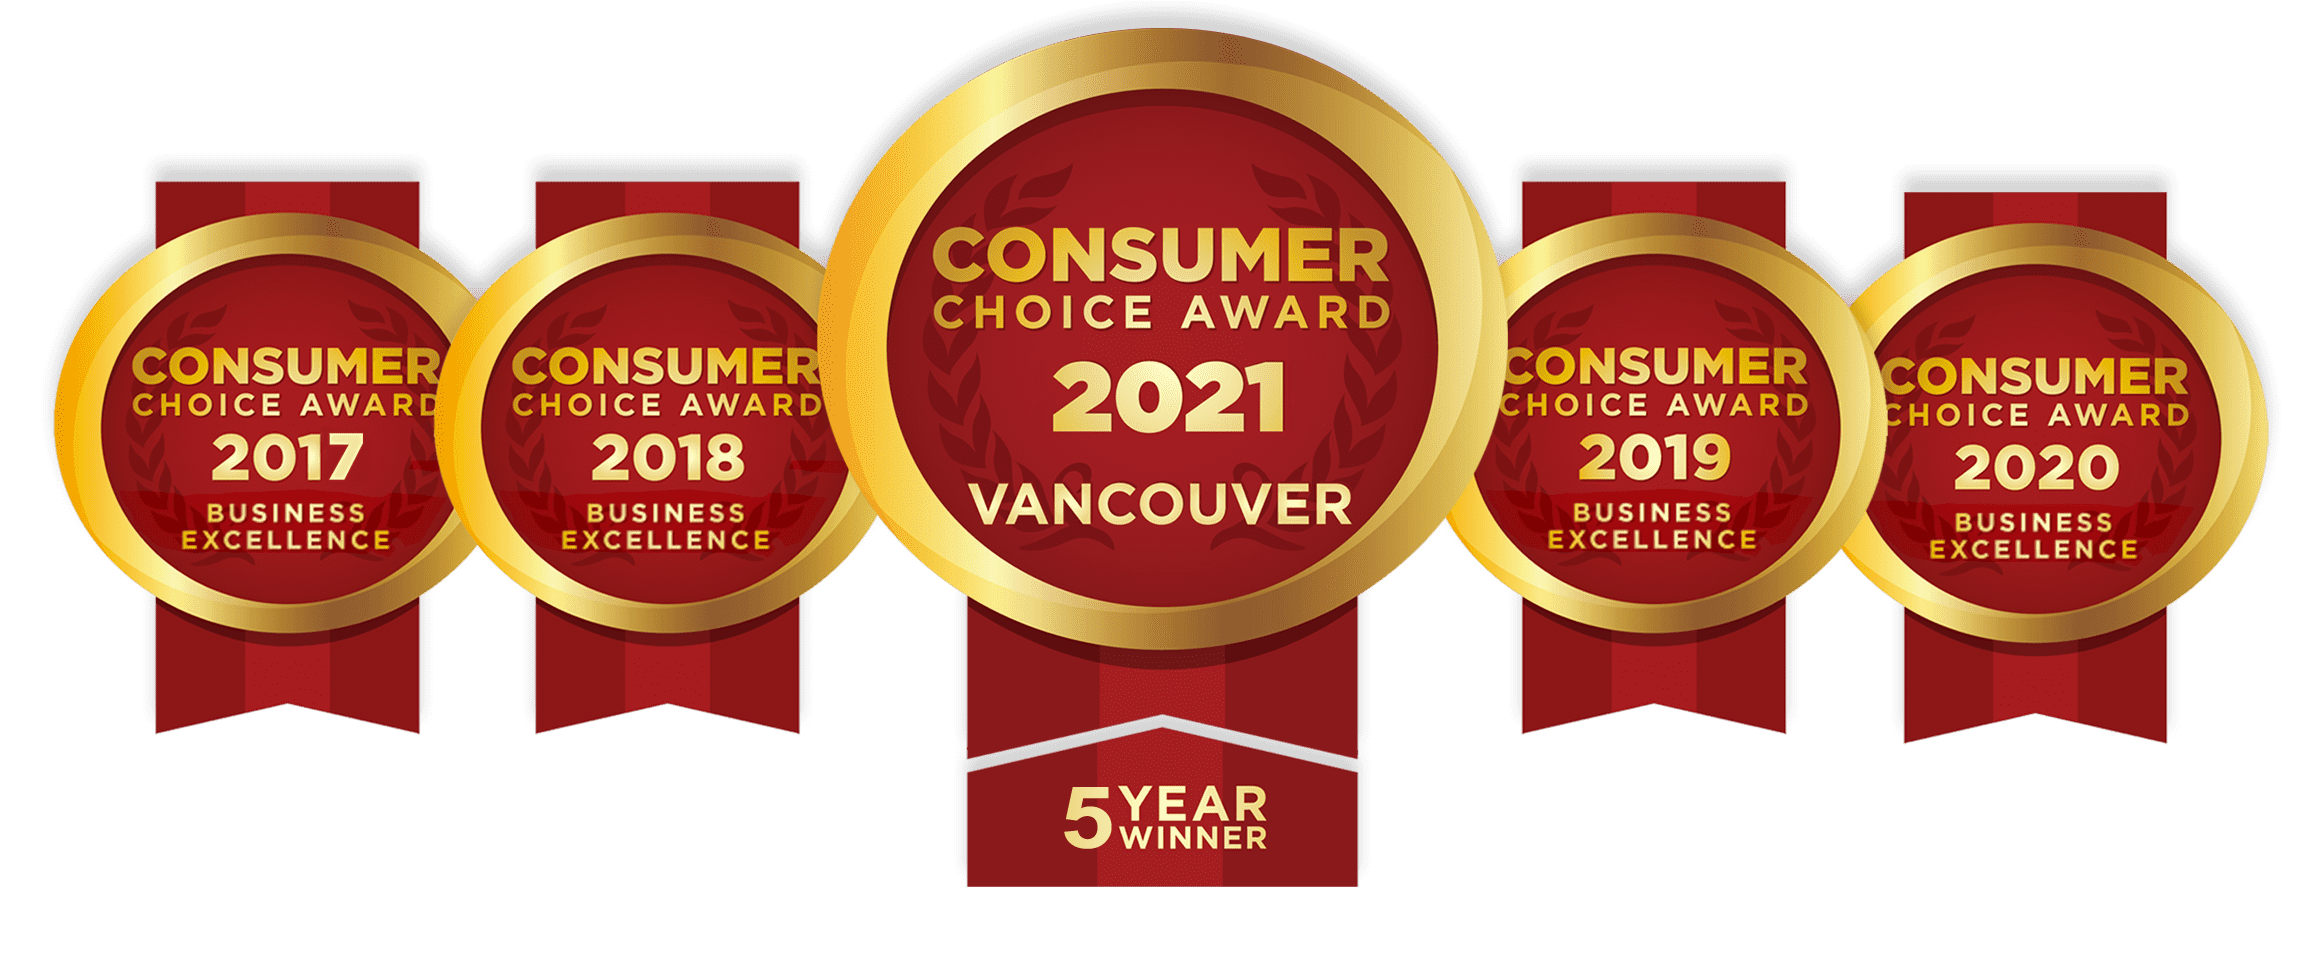 Bella Turf is voted Best Artificial Grass by Consumer's Choice Award